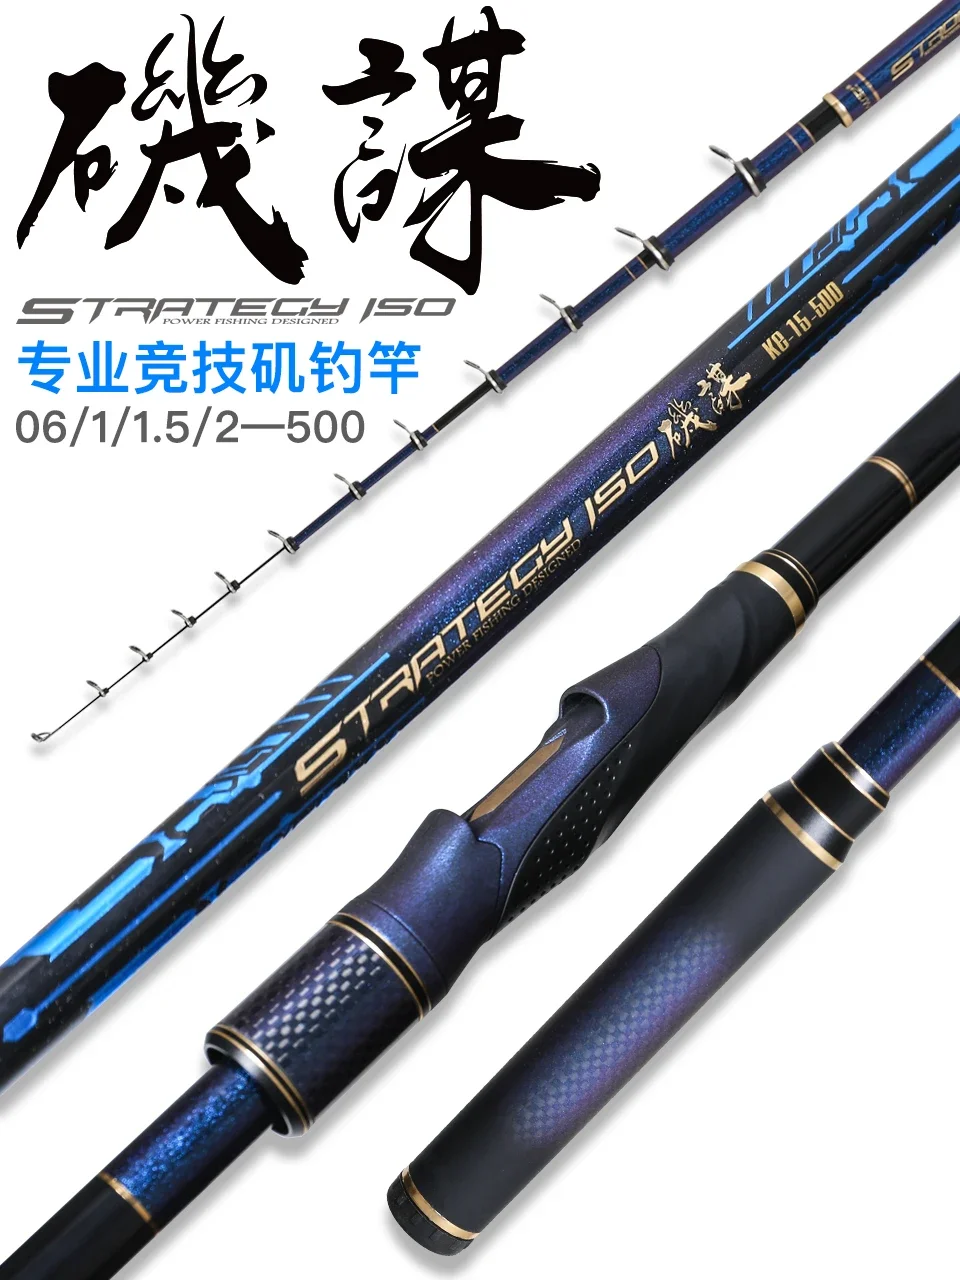 

WLGZ ISO Rock Fishing Rod 5m 5 Sections High Carbon Telescopic Fishing Pole 0.6#1#1.5#2# Spinning Surfcasting Fishing Rods 500